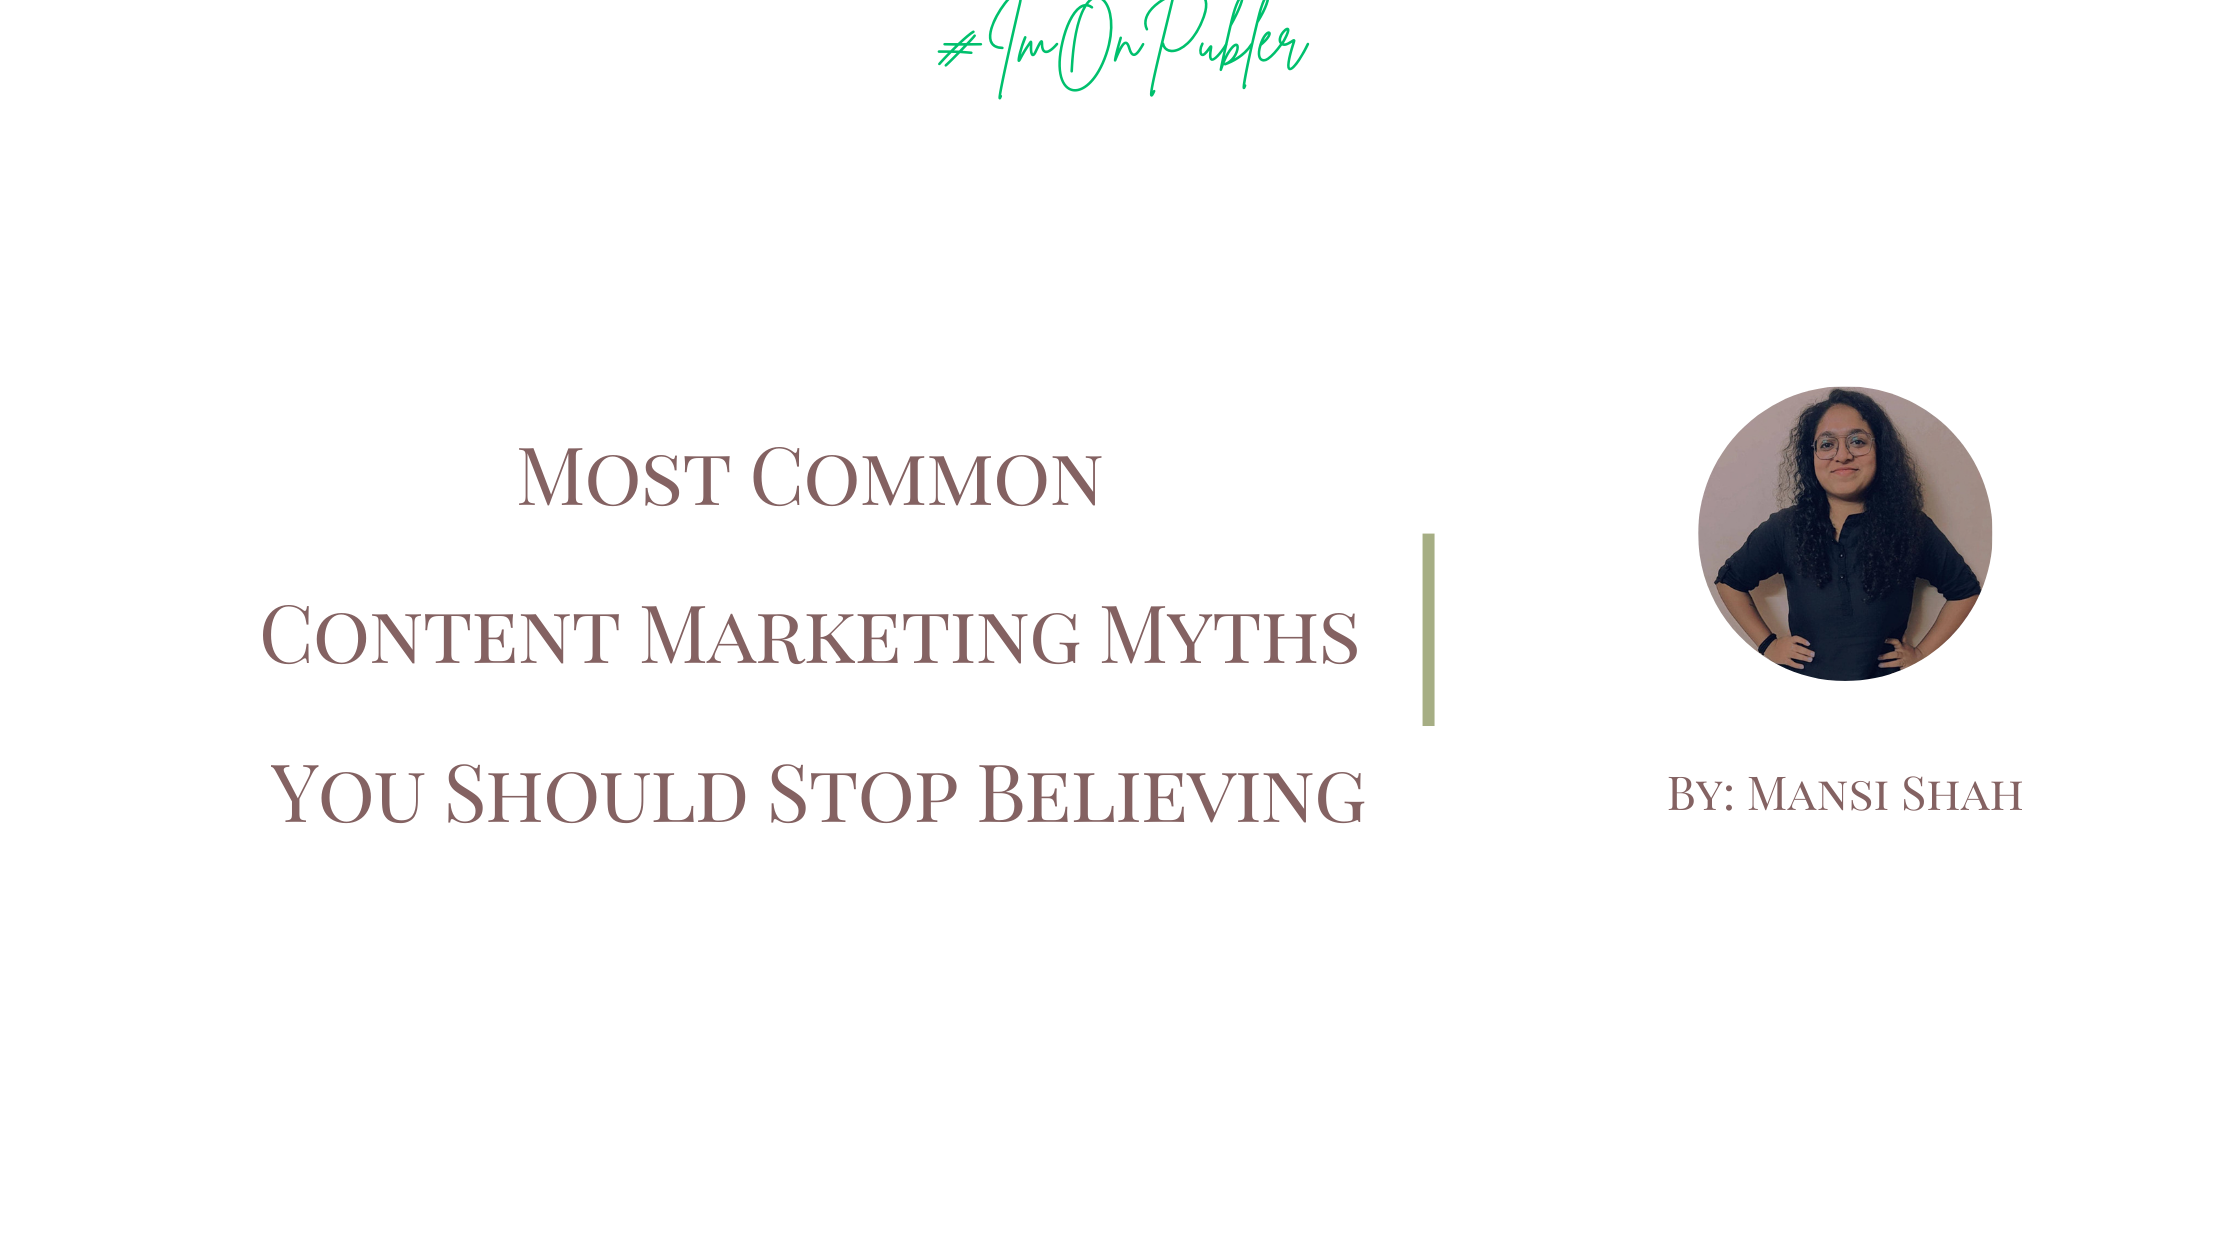 Most Common Content Marketing Myths You Should Stop Believing by Mansi Shah